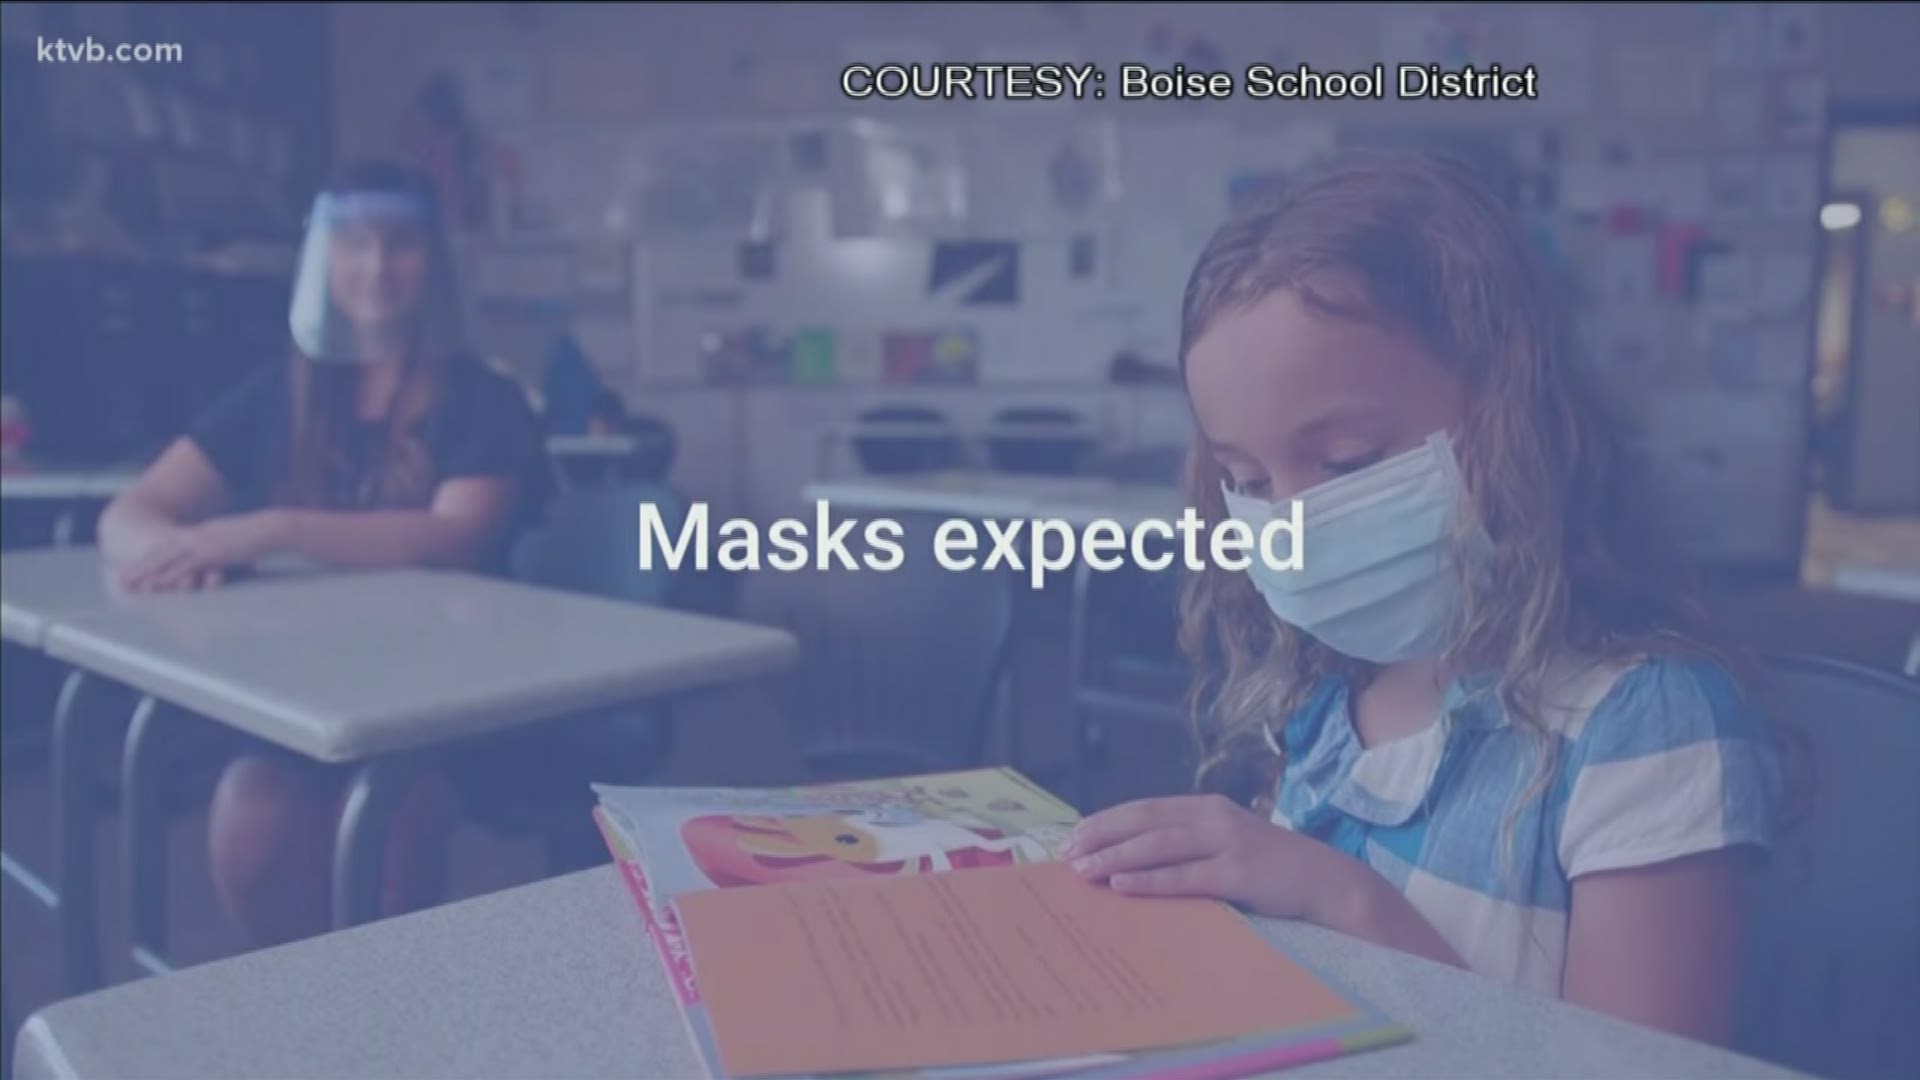 The district's website video lays out operational guidelines and safety precautions students, parents, teachers and staff can expect for the upcoming school year.